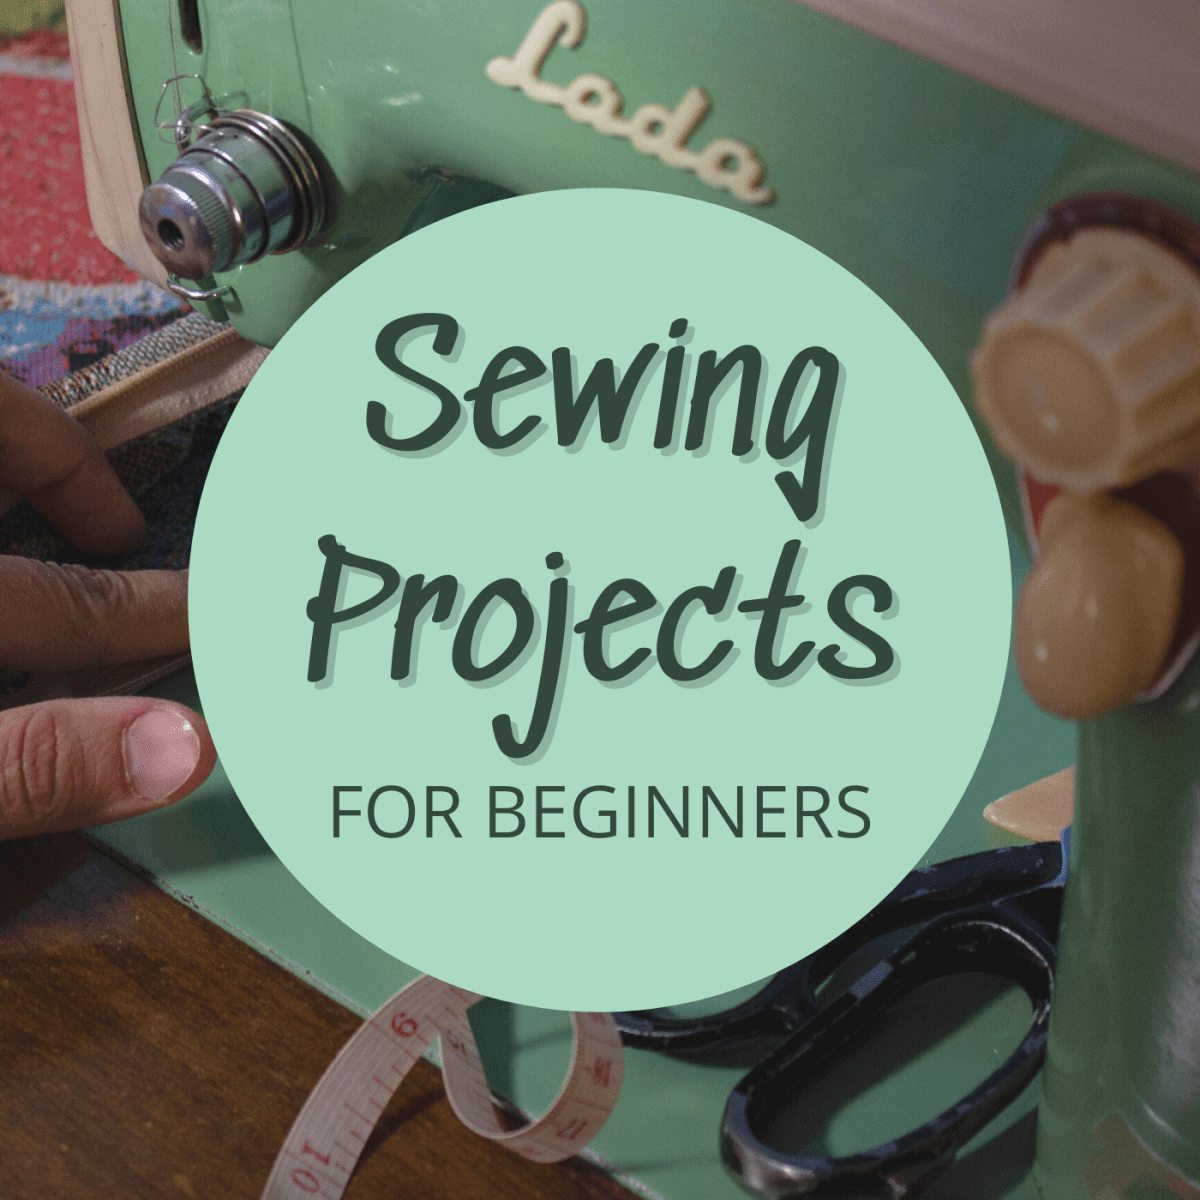 18 Easy Sewing Projects for Beginners - FeltMagnet